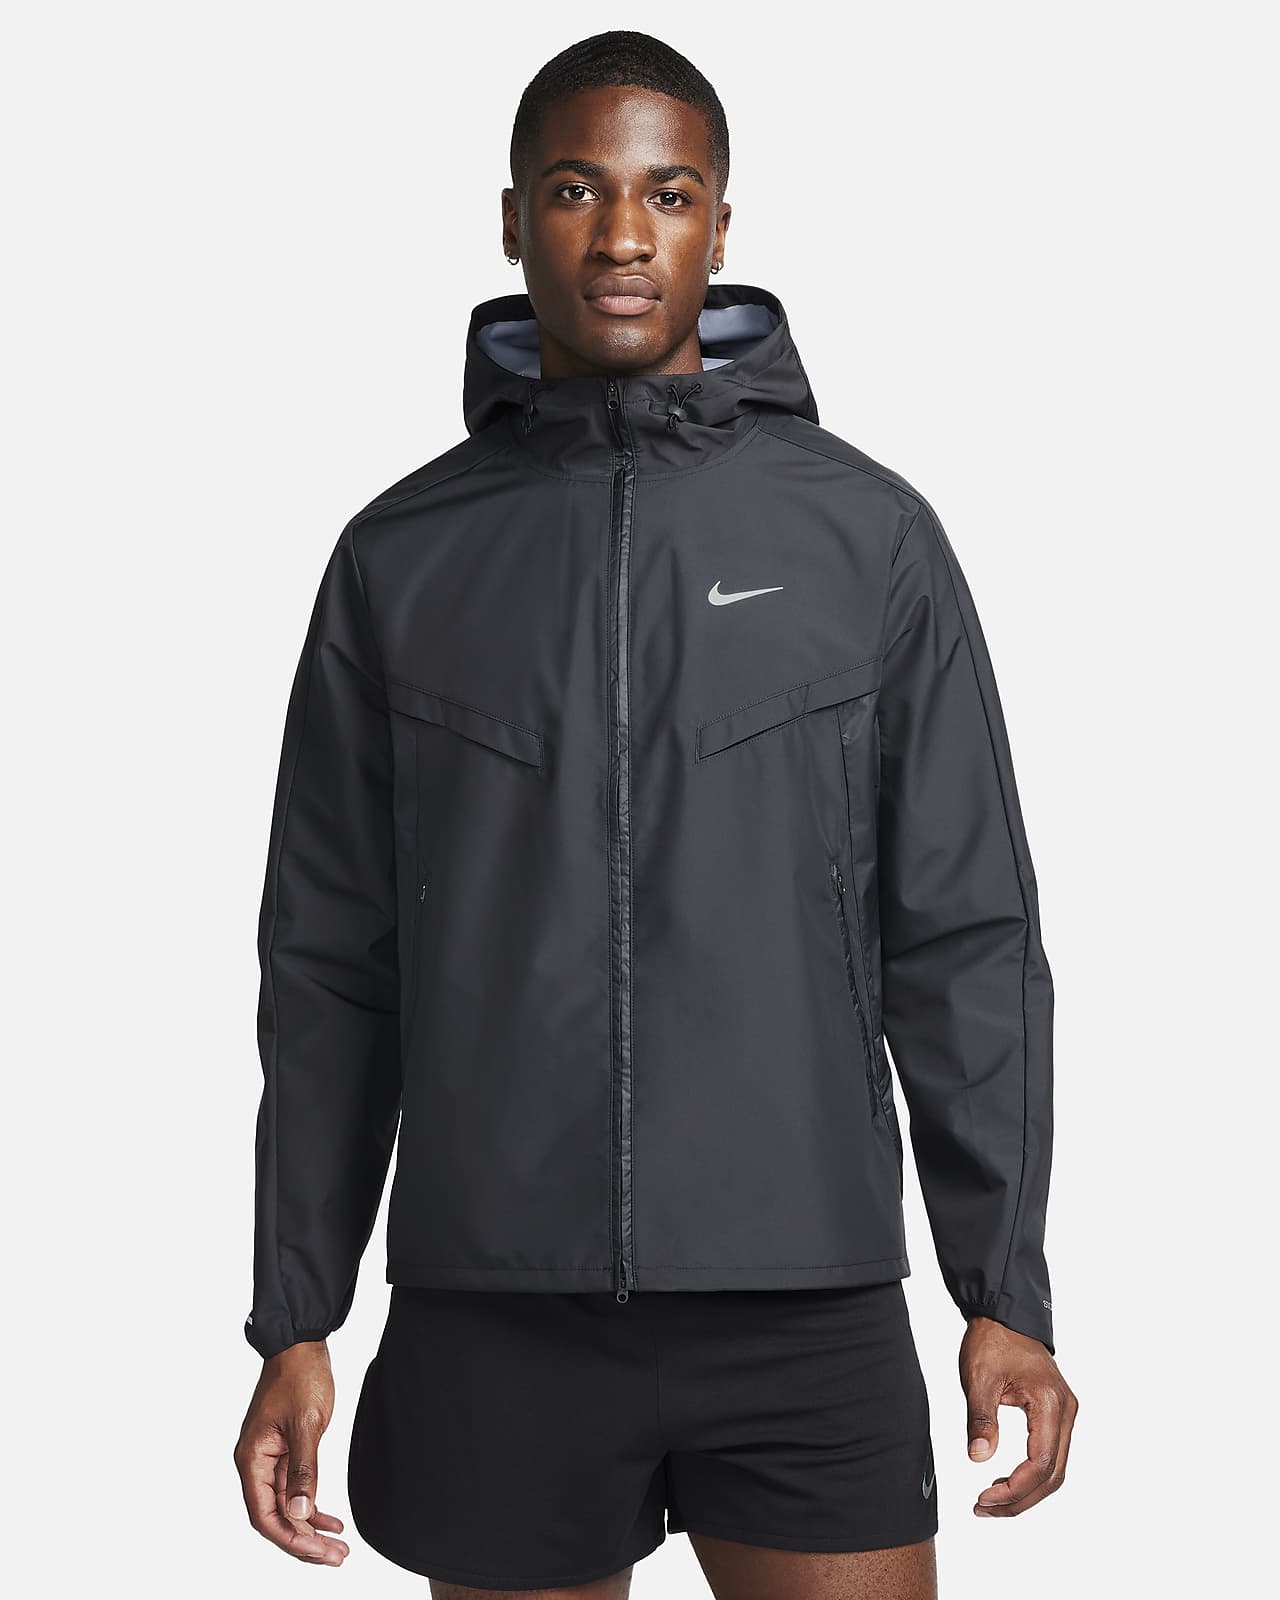 Adidas Neo Polyester Jackets - Buy Adidas Neo Polyester Jackets online in  India